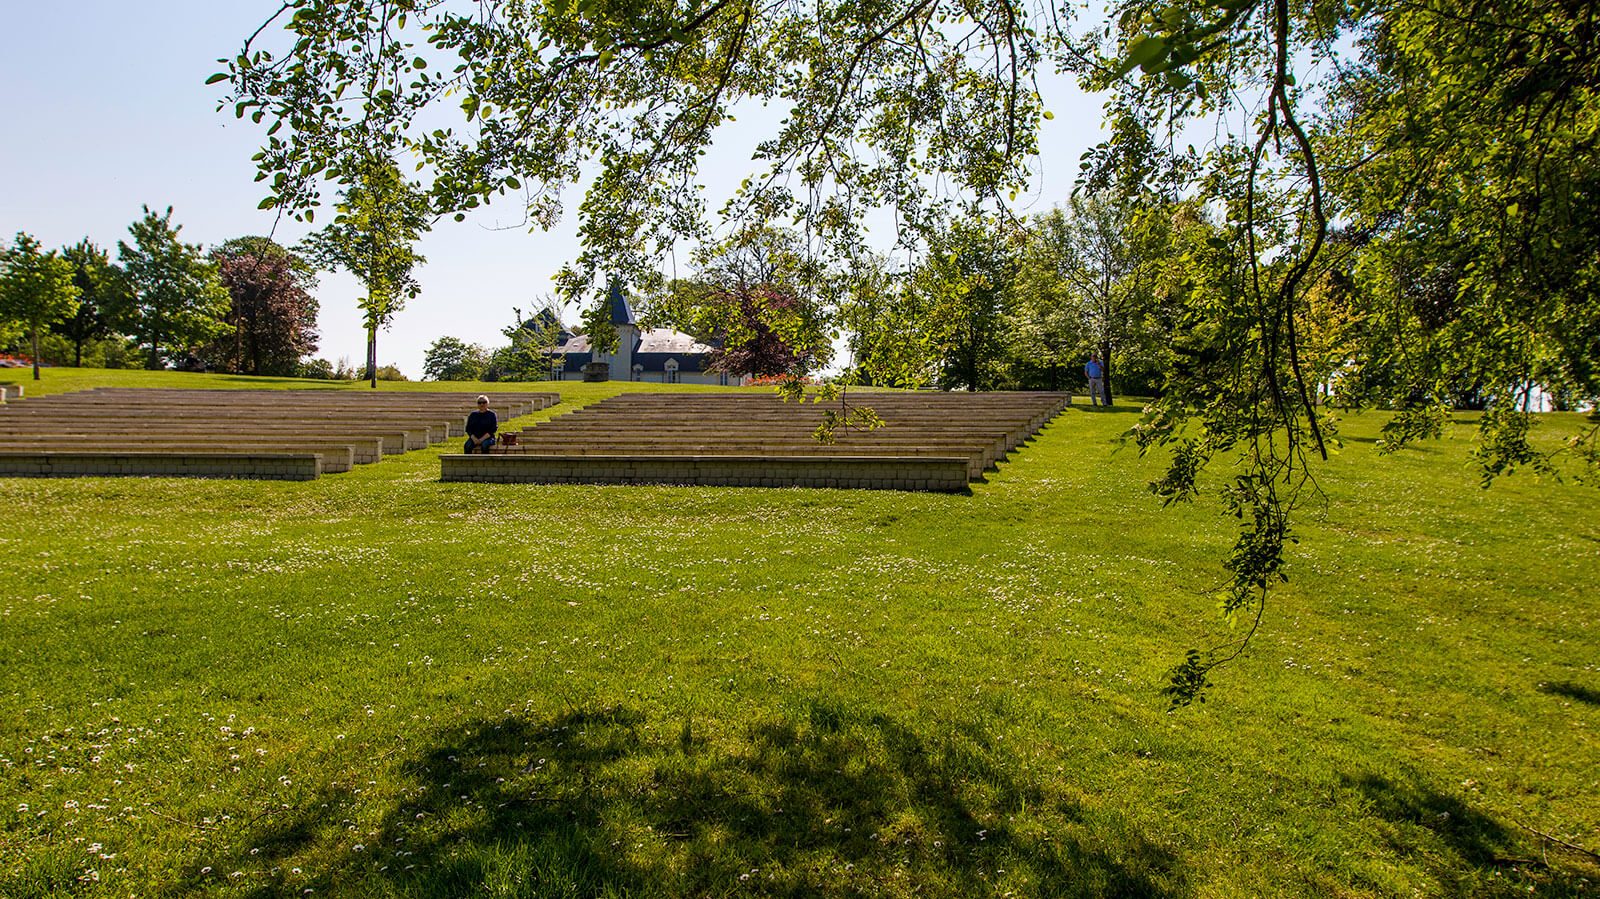 The green theater in the park of Vaux-sur-Mer